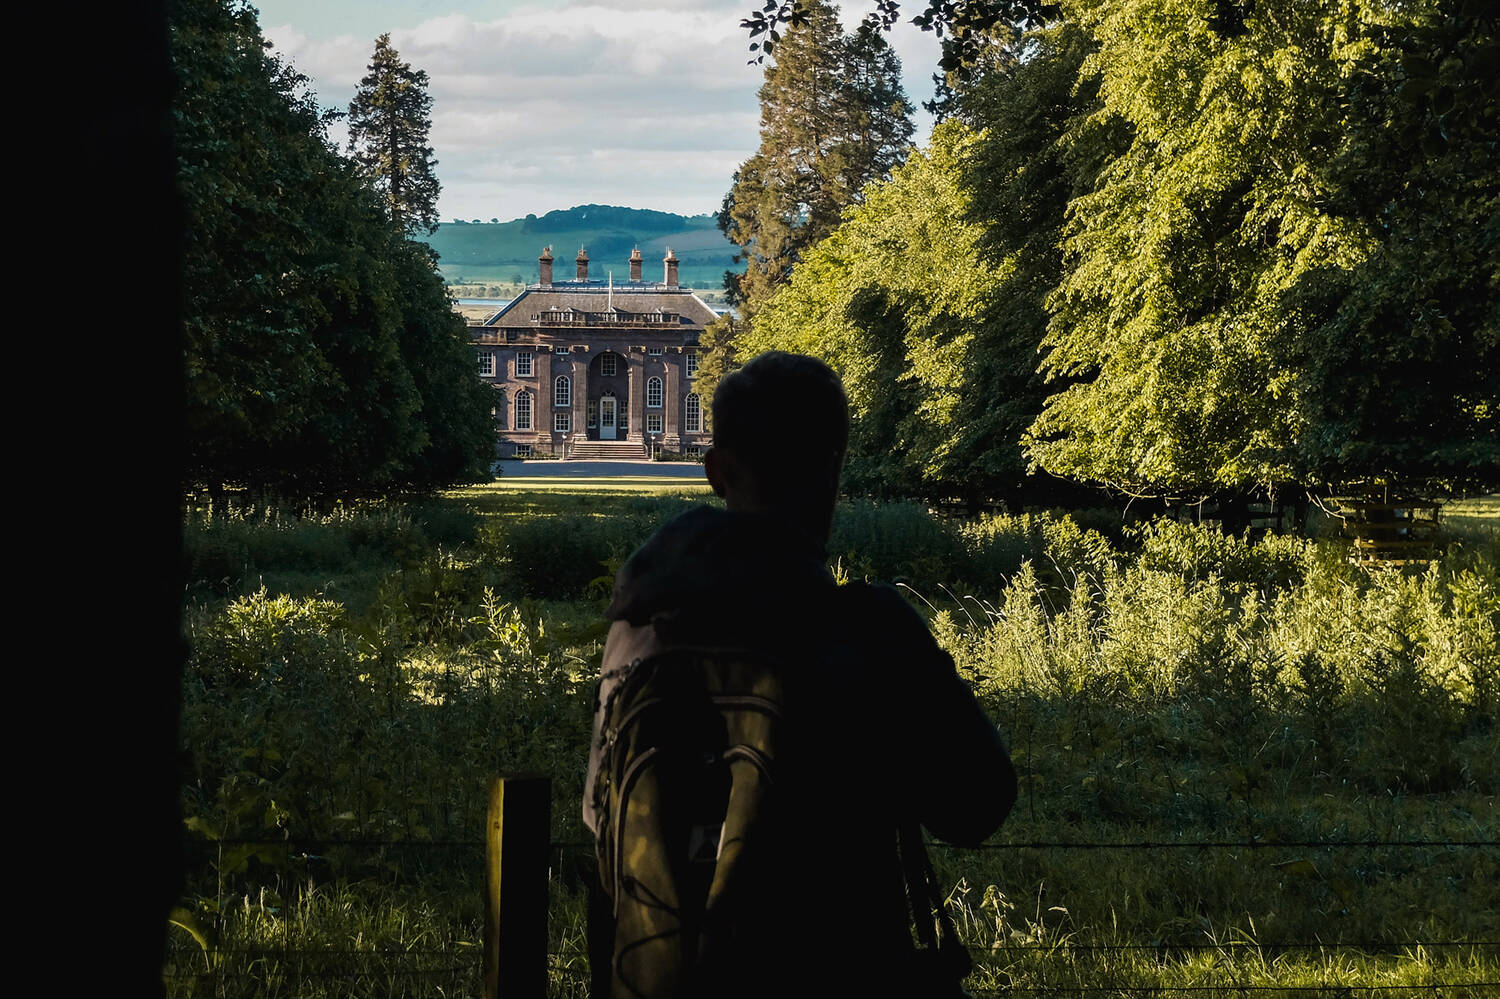 A man with a backpack on looks across a sloping grassy field, flanked by a variety of trees in full leaf. At the bottom of the field is House of Dun. The sun is rising over the House and field, and the man is in shadow while the landscape is cast in early golden sunlight.